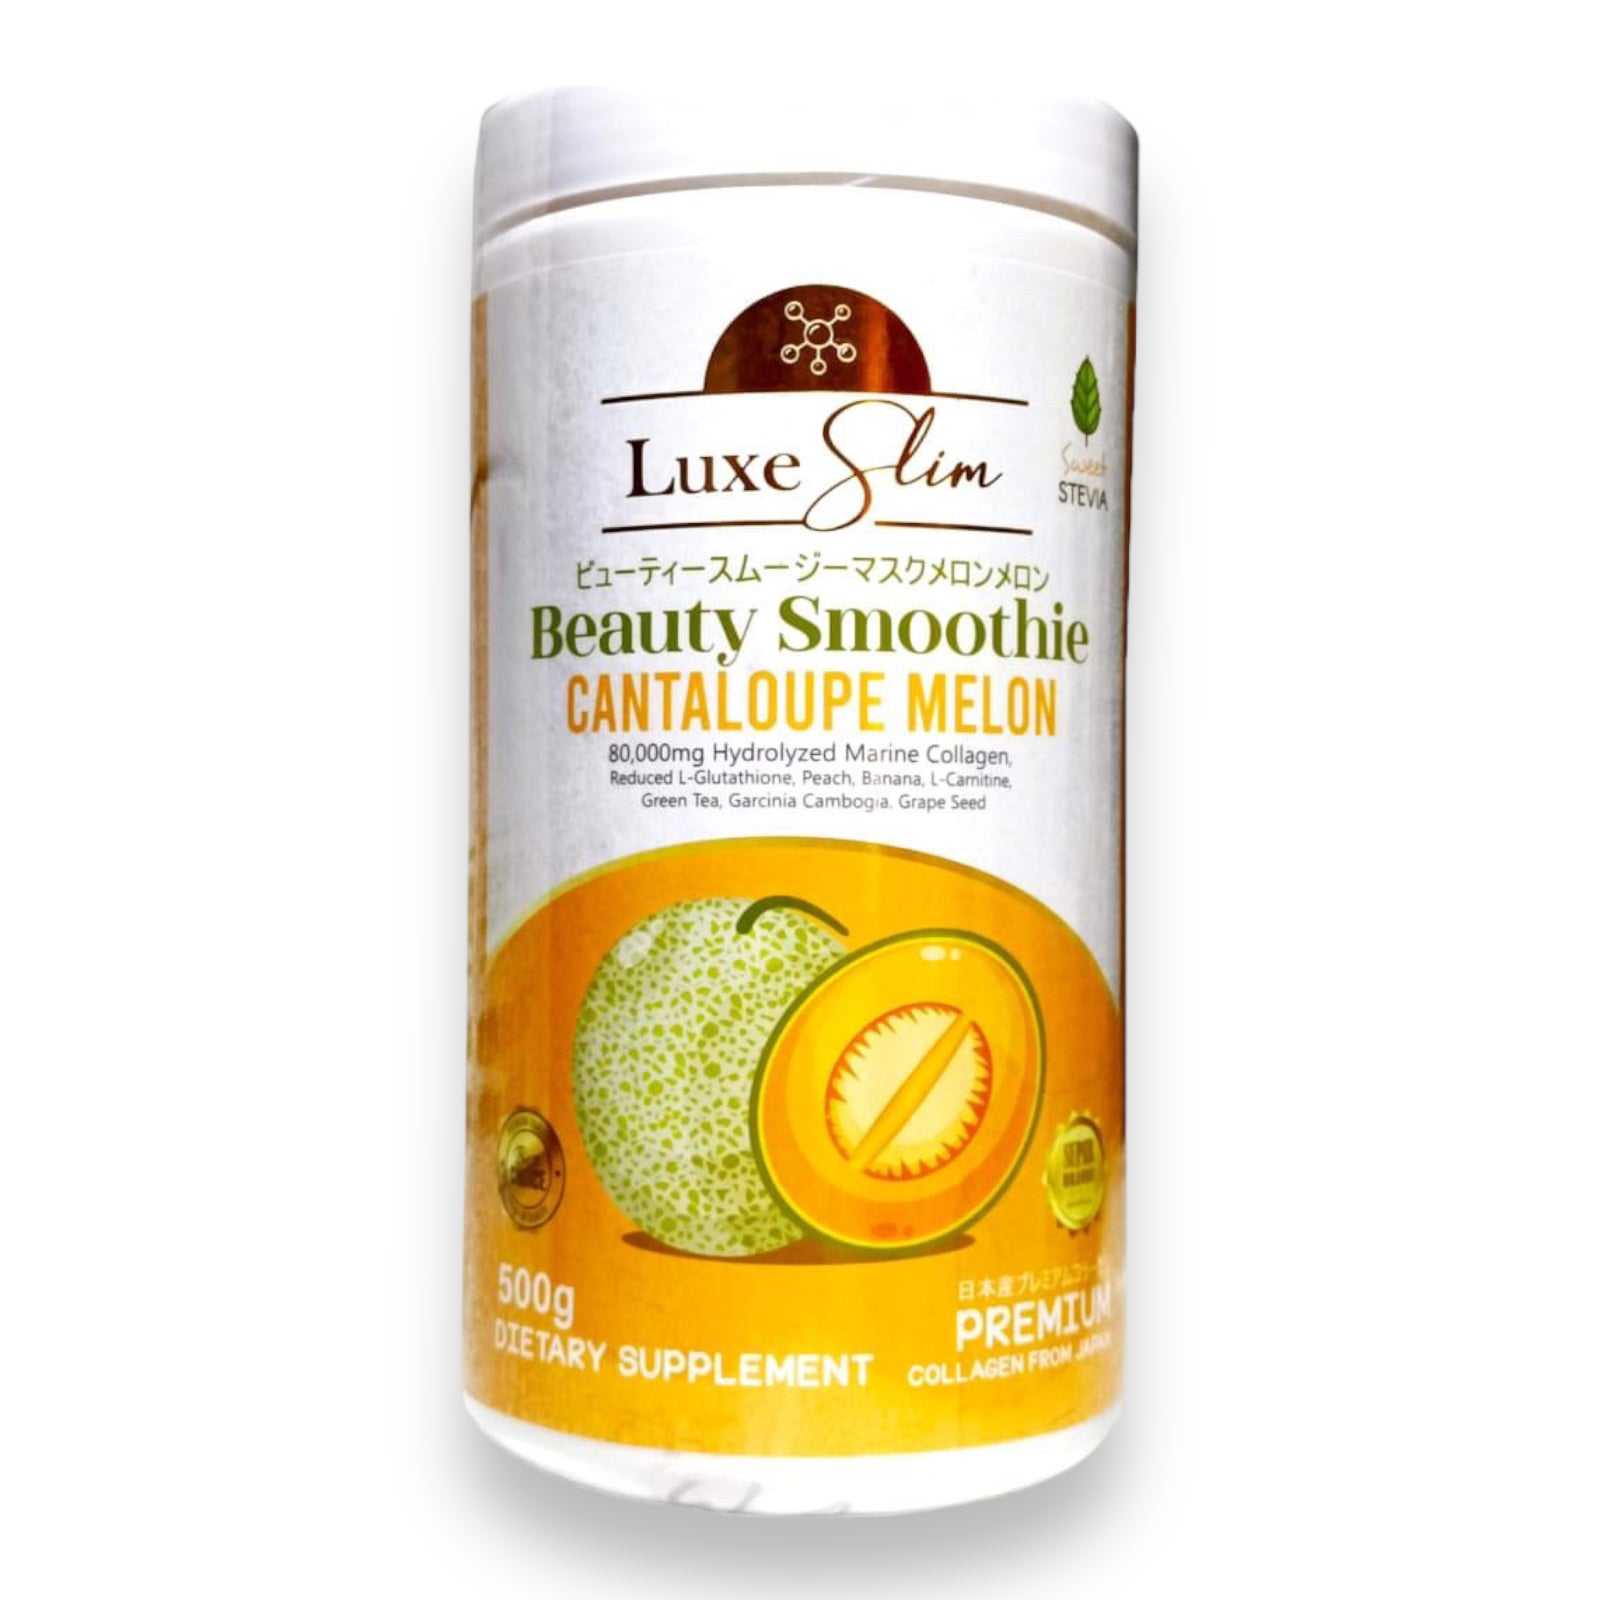 Luxe Slim - Beauty Smoothie Cantaloupe Melon Canister - 500g ( HALF KILO )